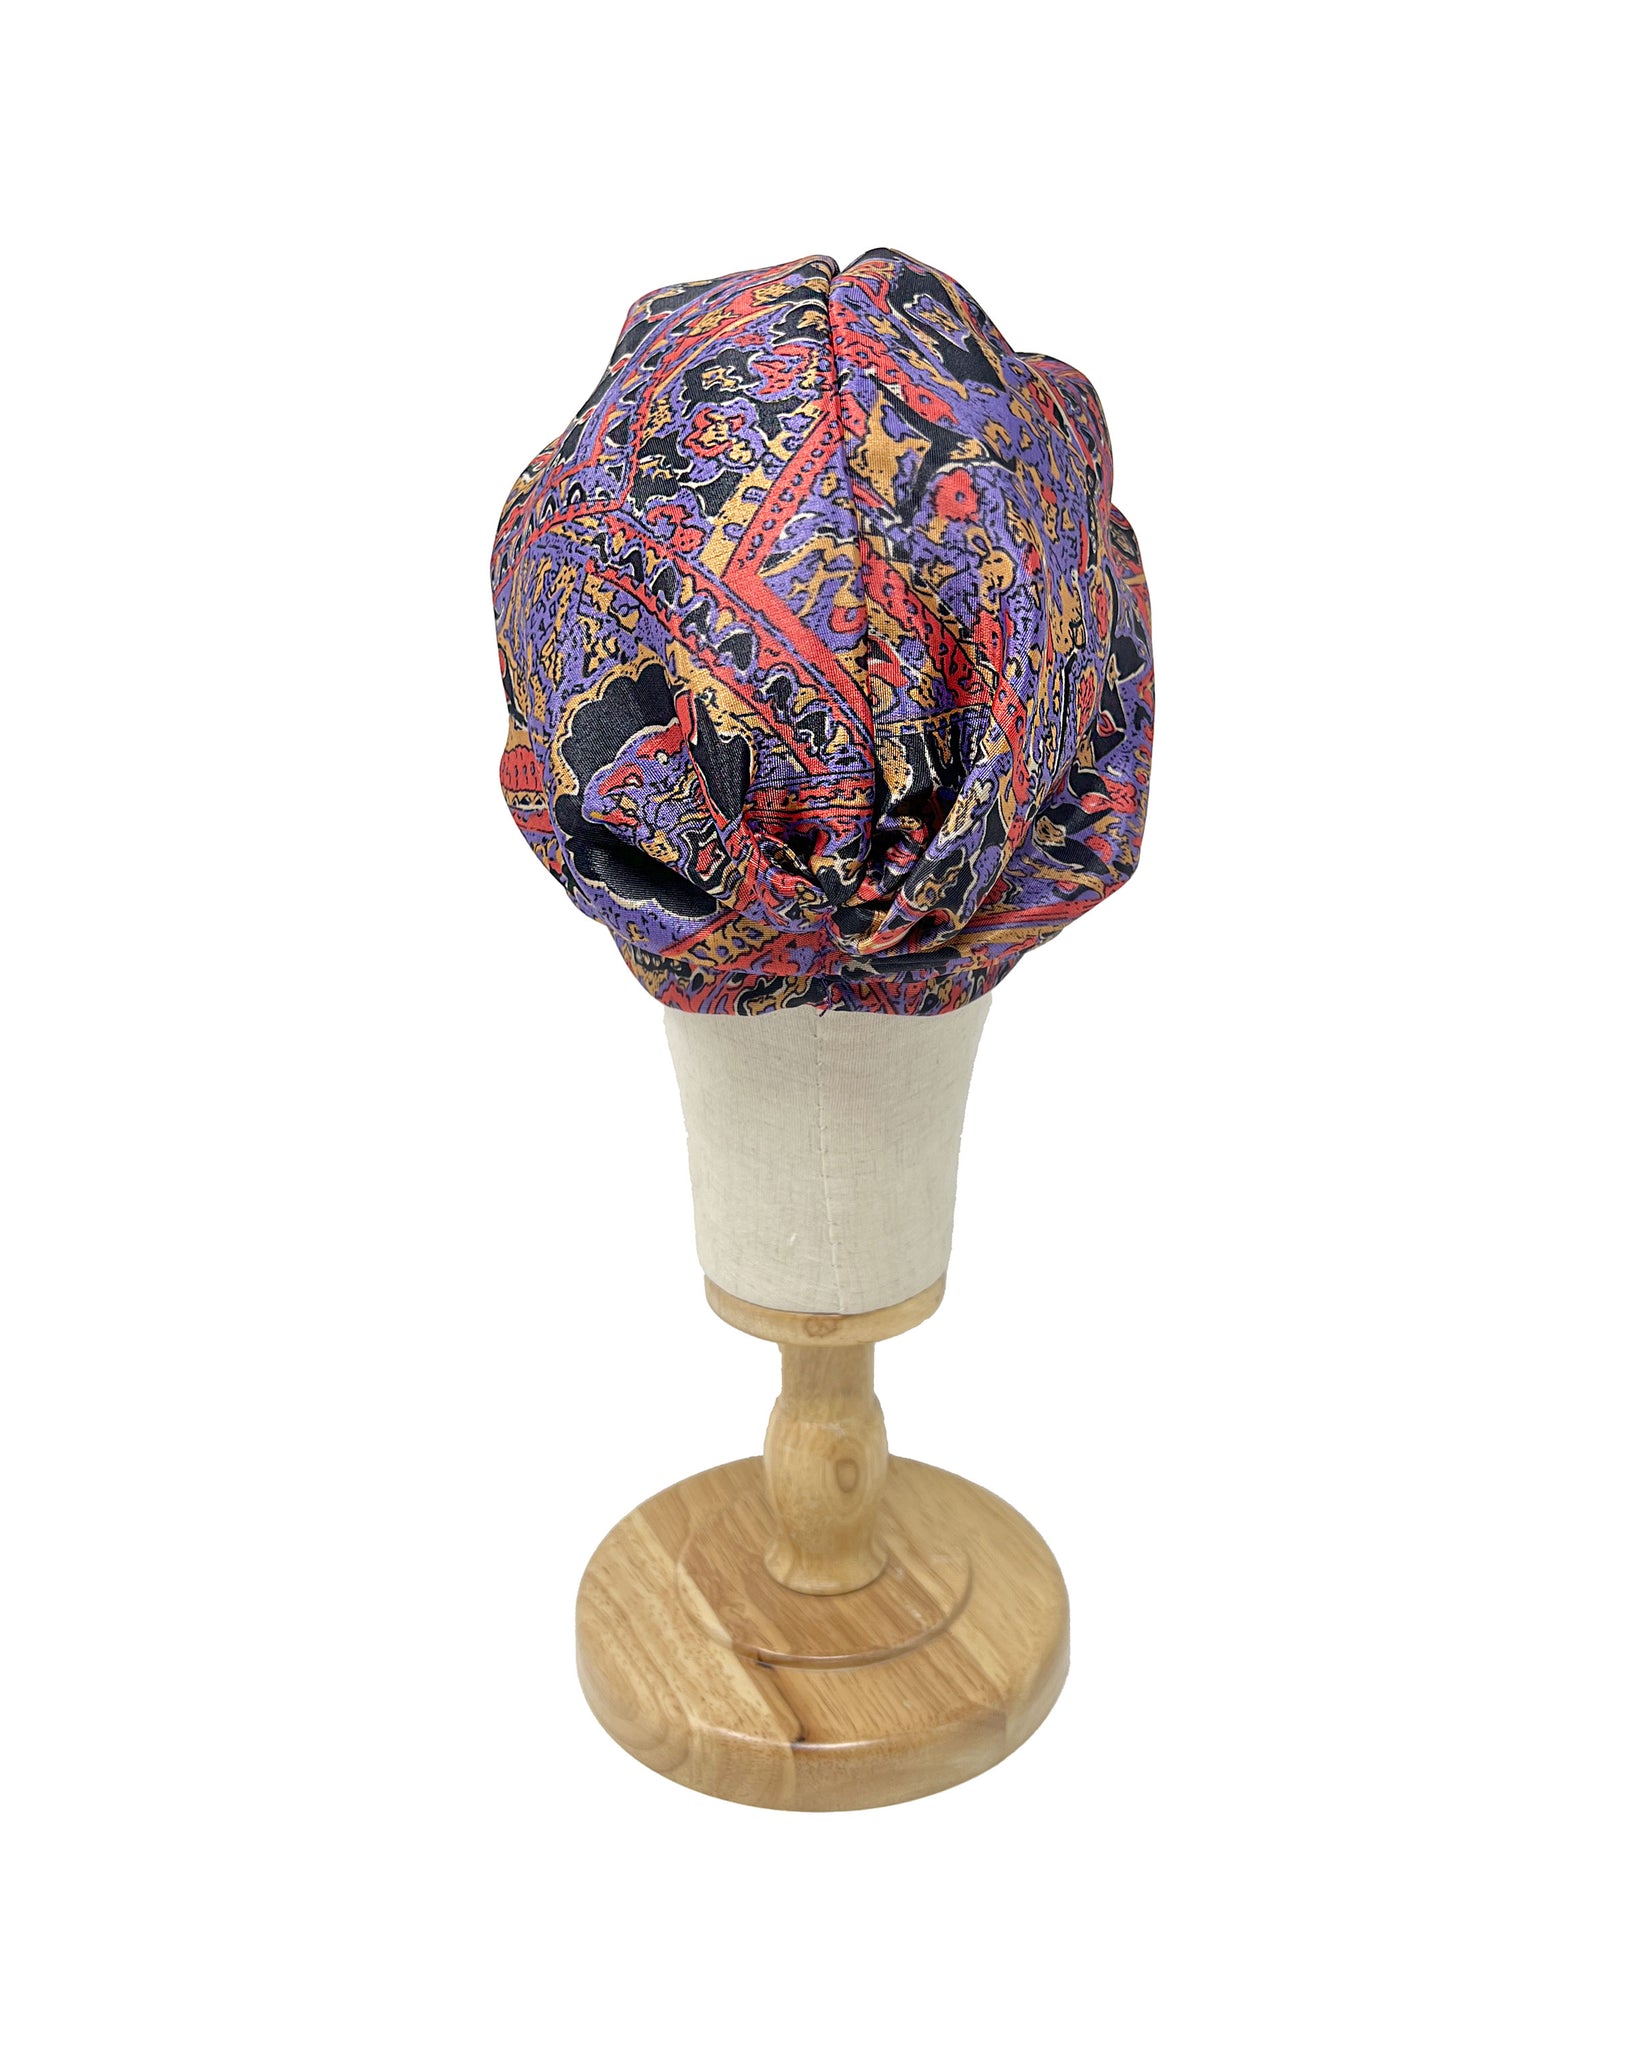 Black and red paisley patterned "Rachel" turban